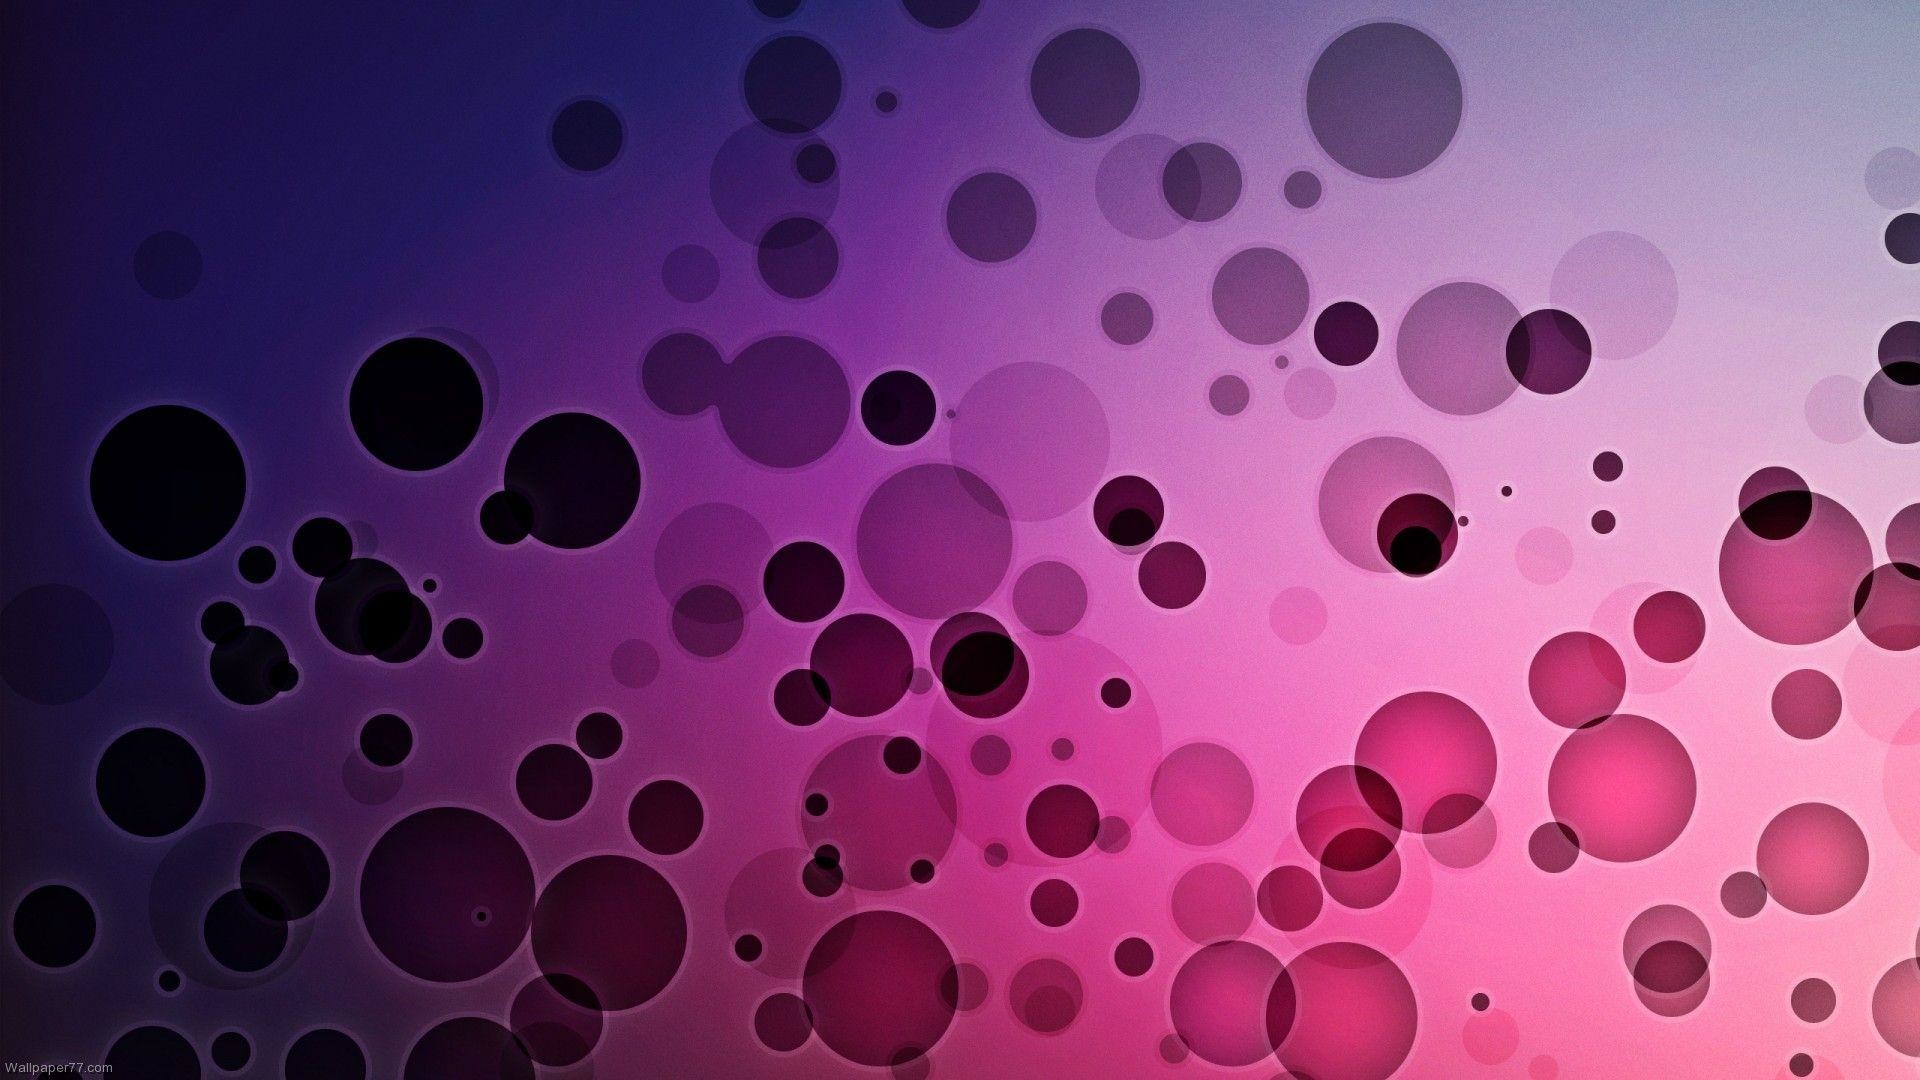 1920x1080 Black And Purple Backgrounds 18086 Wallpapers | Wallver.